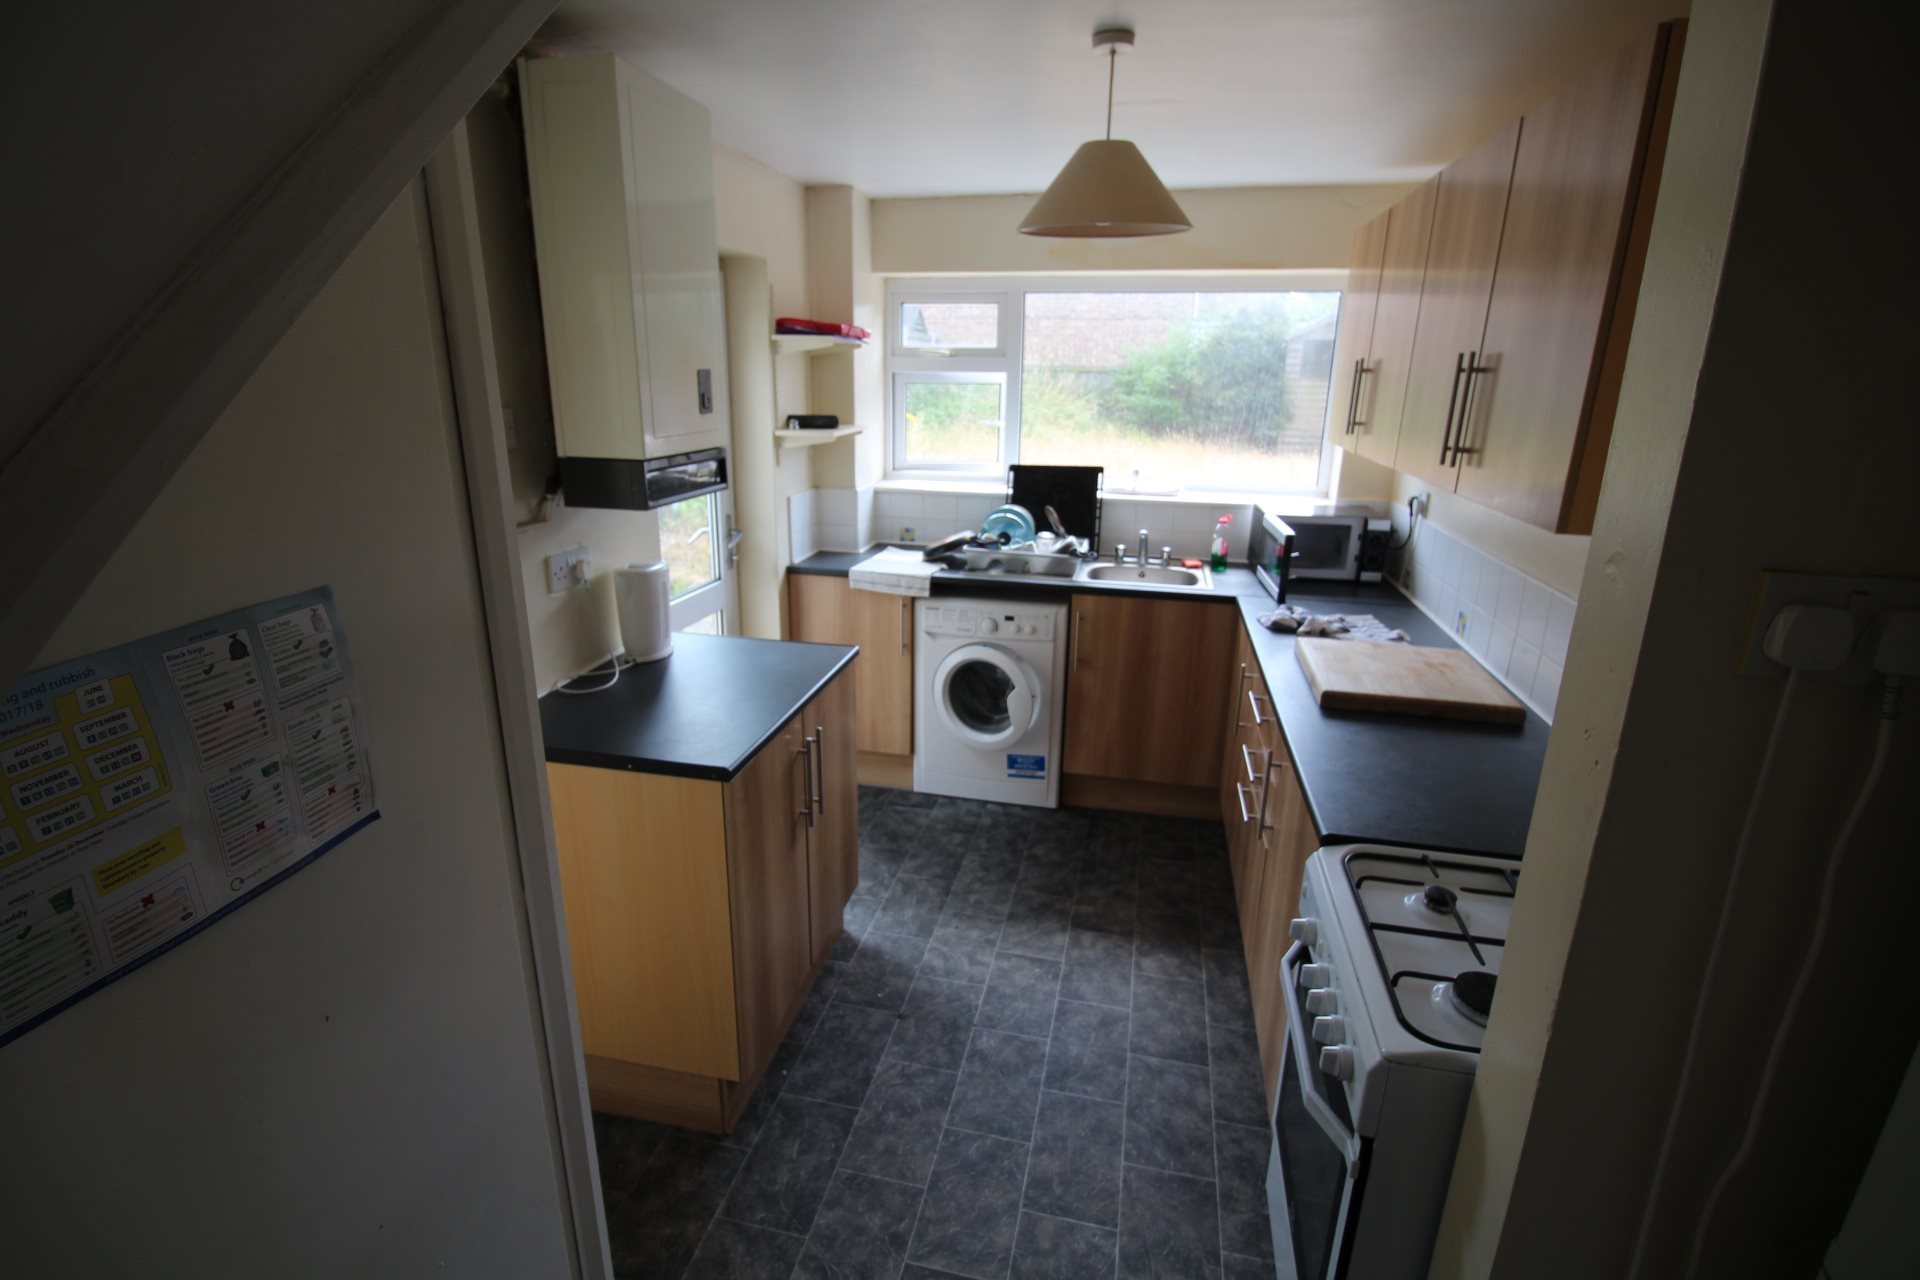 1 bed house / flat share to rent in Petworth Close, Wivenhoe 2